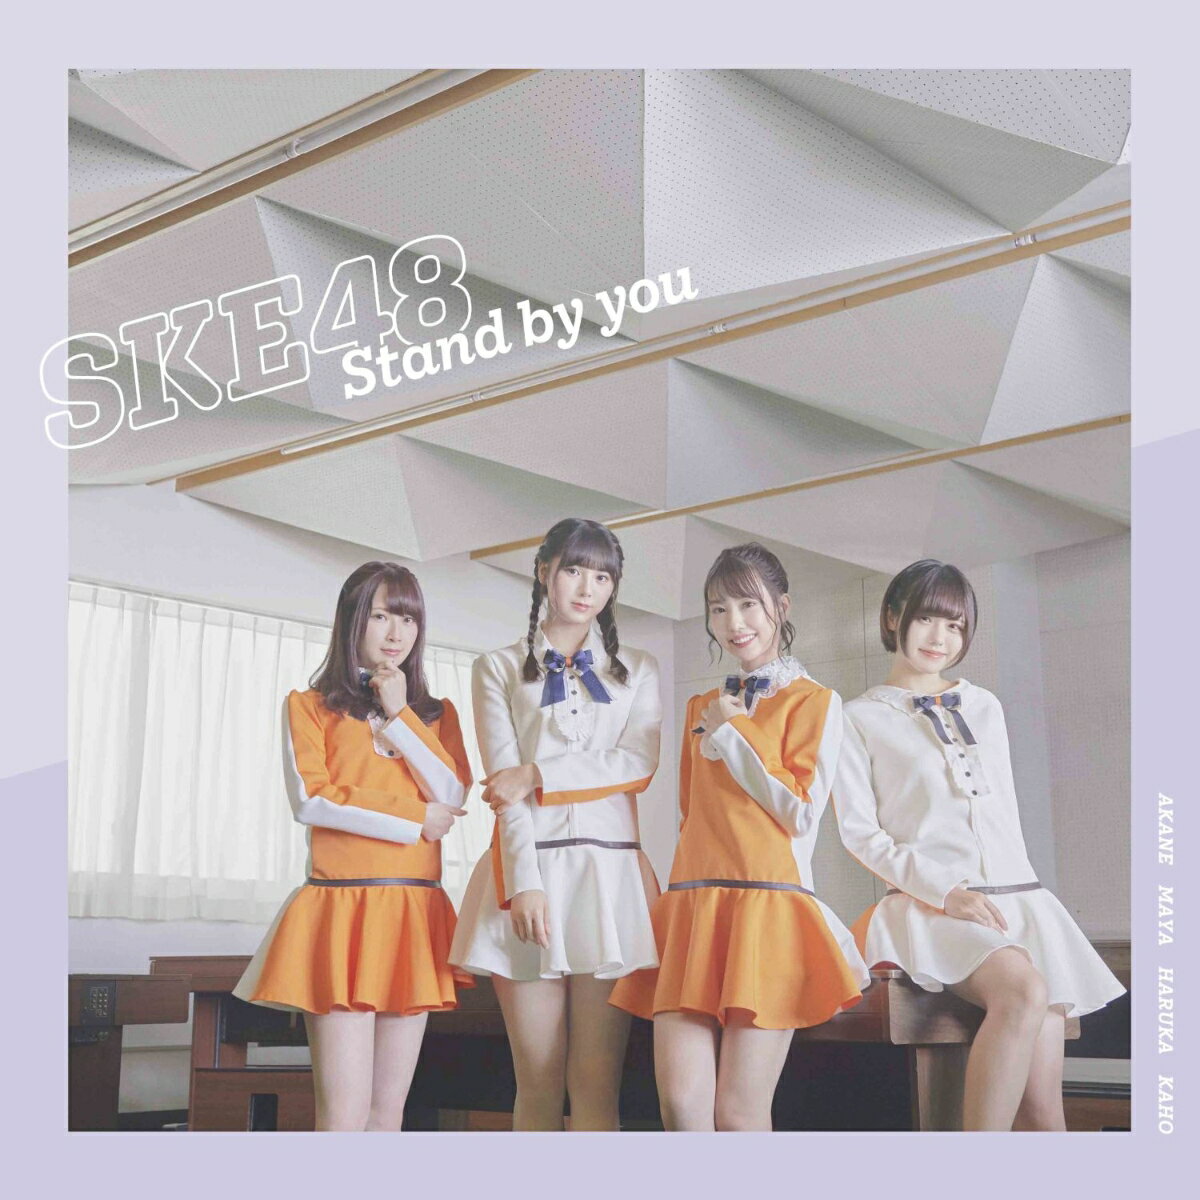 Stand by you (通常盤B CD＋DVD)